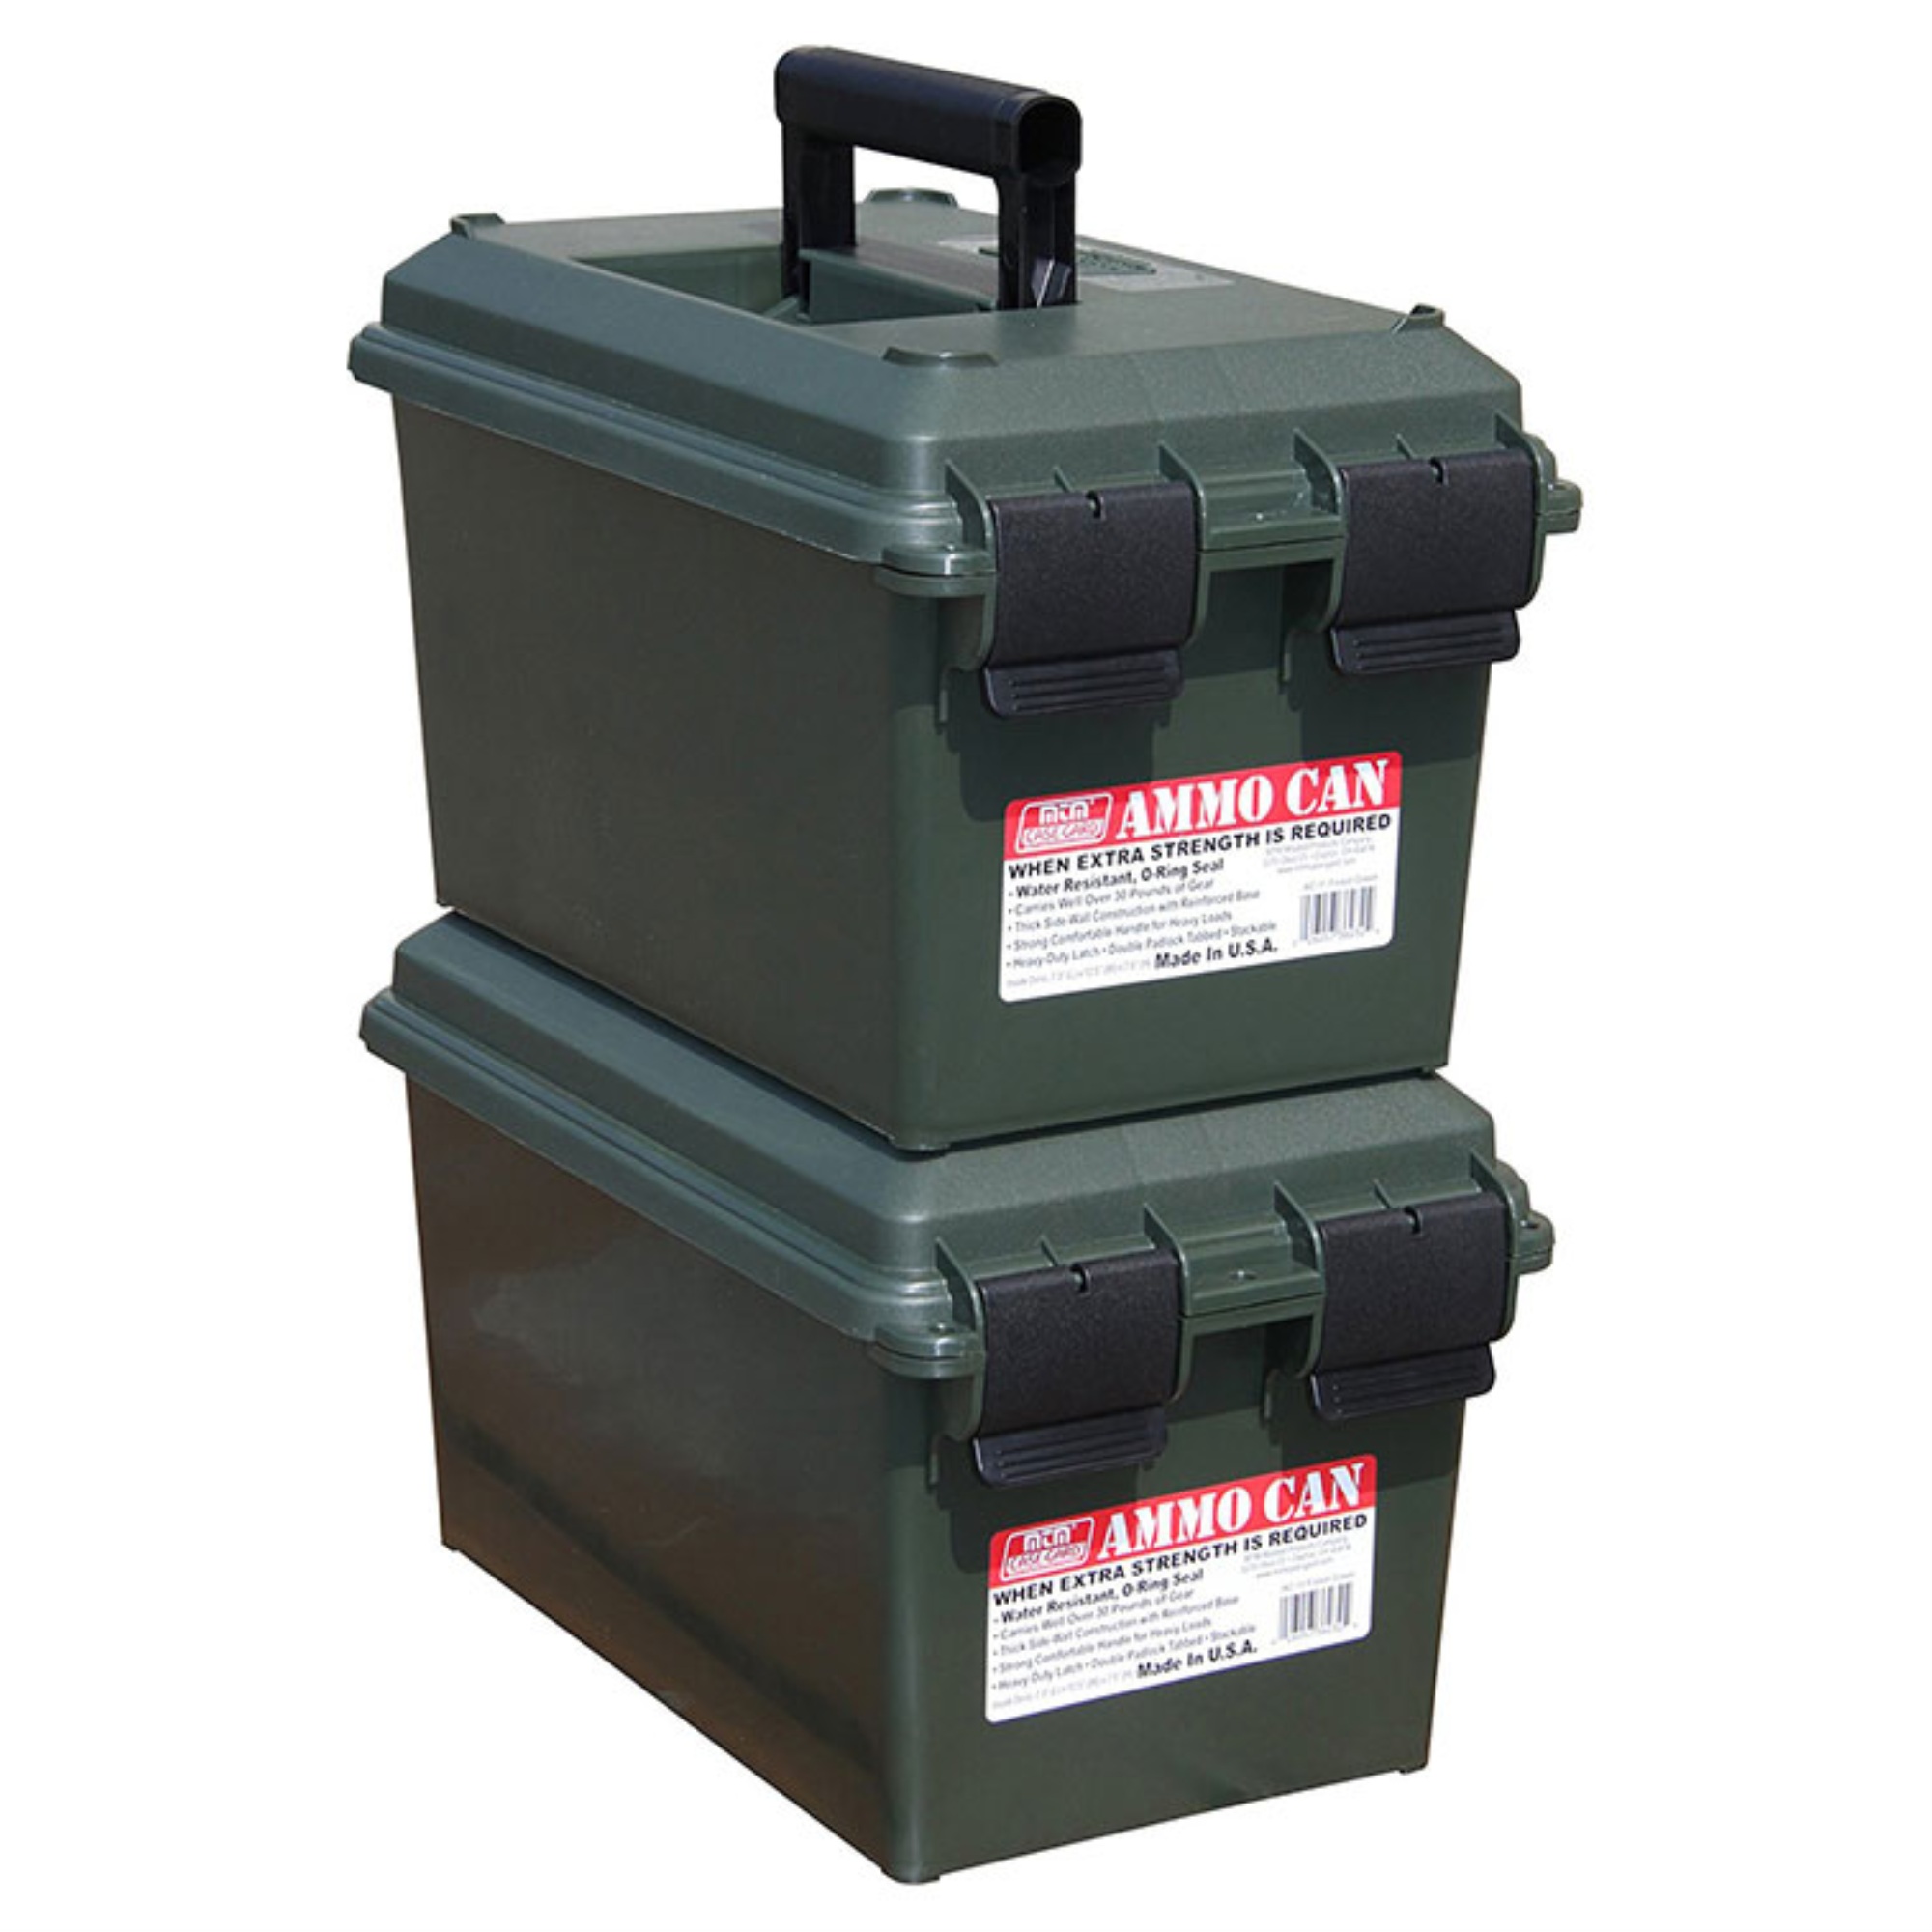 MTM Rugged Plastic Ammunition Can W/ O-Ring Seal for Water Resistance, Green, 6" x 5" x 7" - image 2 of 2